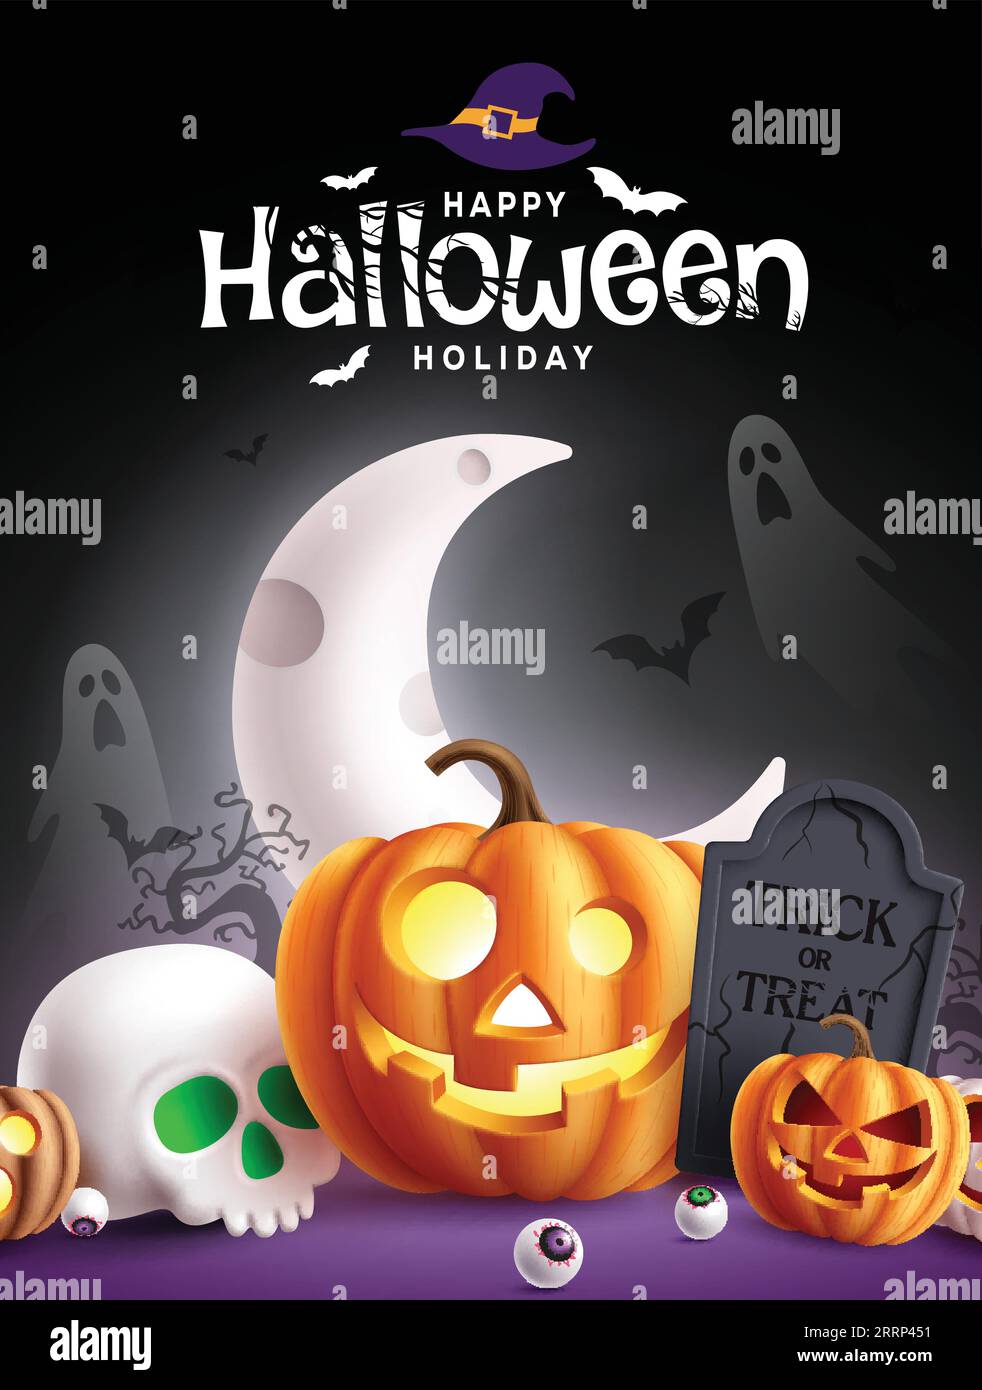 Happy halloween text vector design. Halloween invitation card with pumpkin, skull, graveyard, ghost and half moon decoration elements for holiday Stock Vector